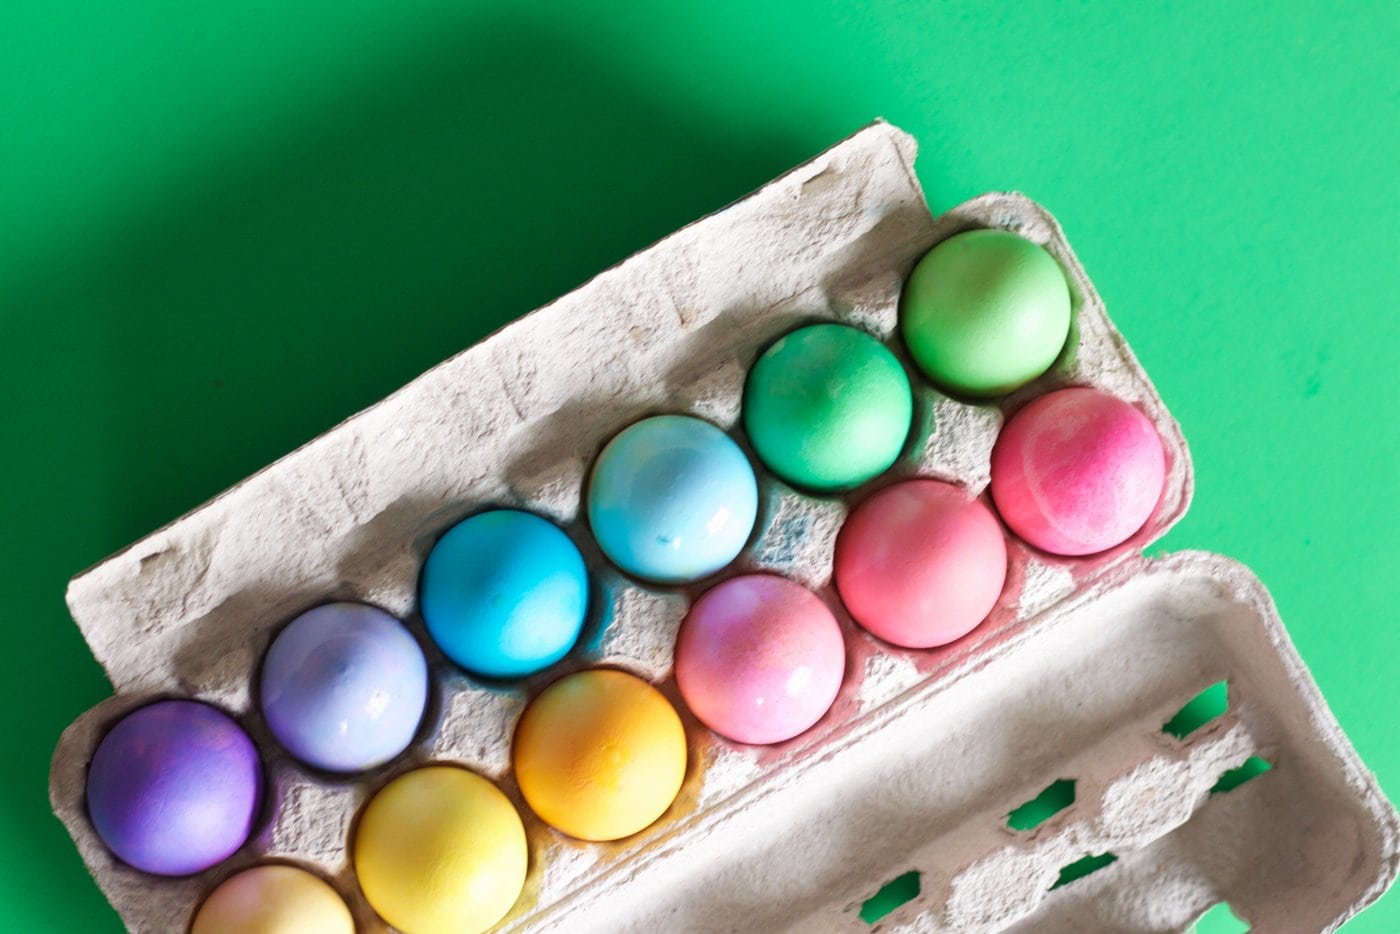 Colorful Easter eggs dyed in a rainbow of colors